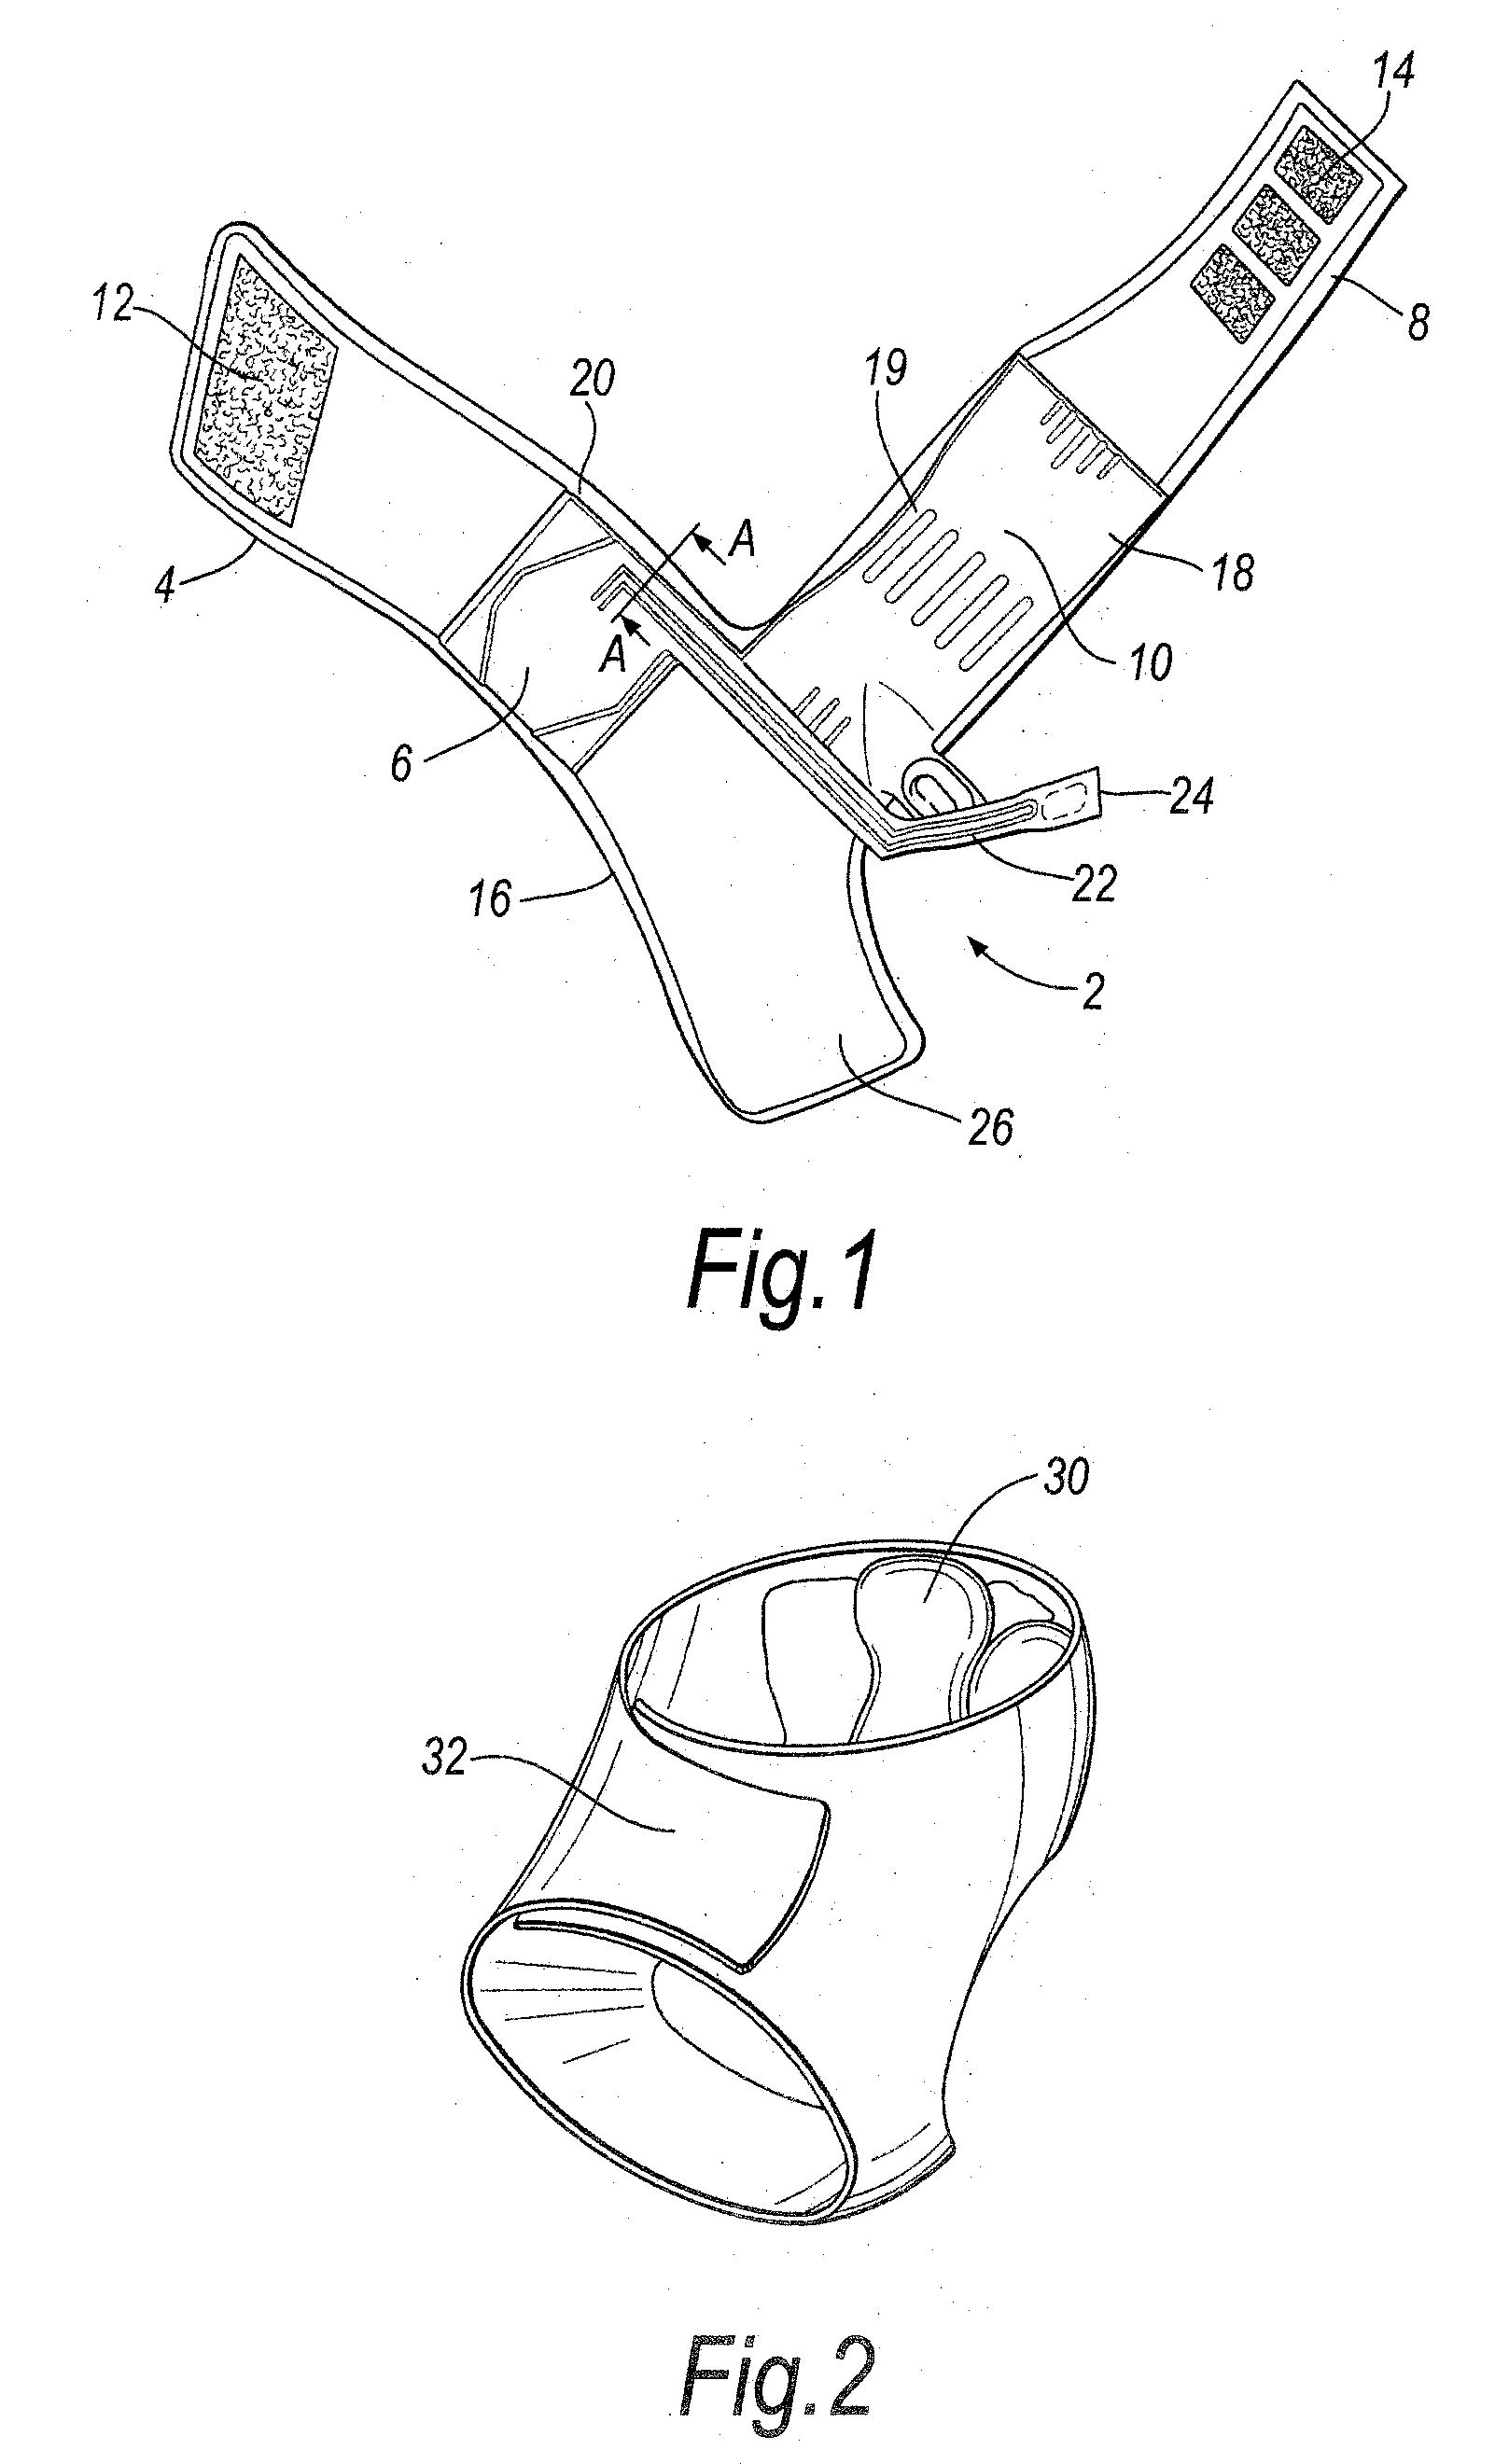 Compression device for the foot